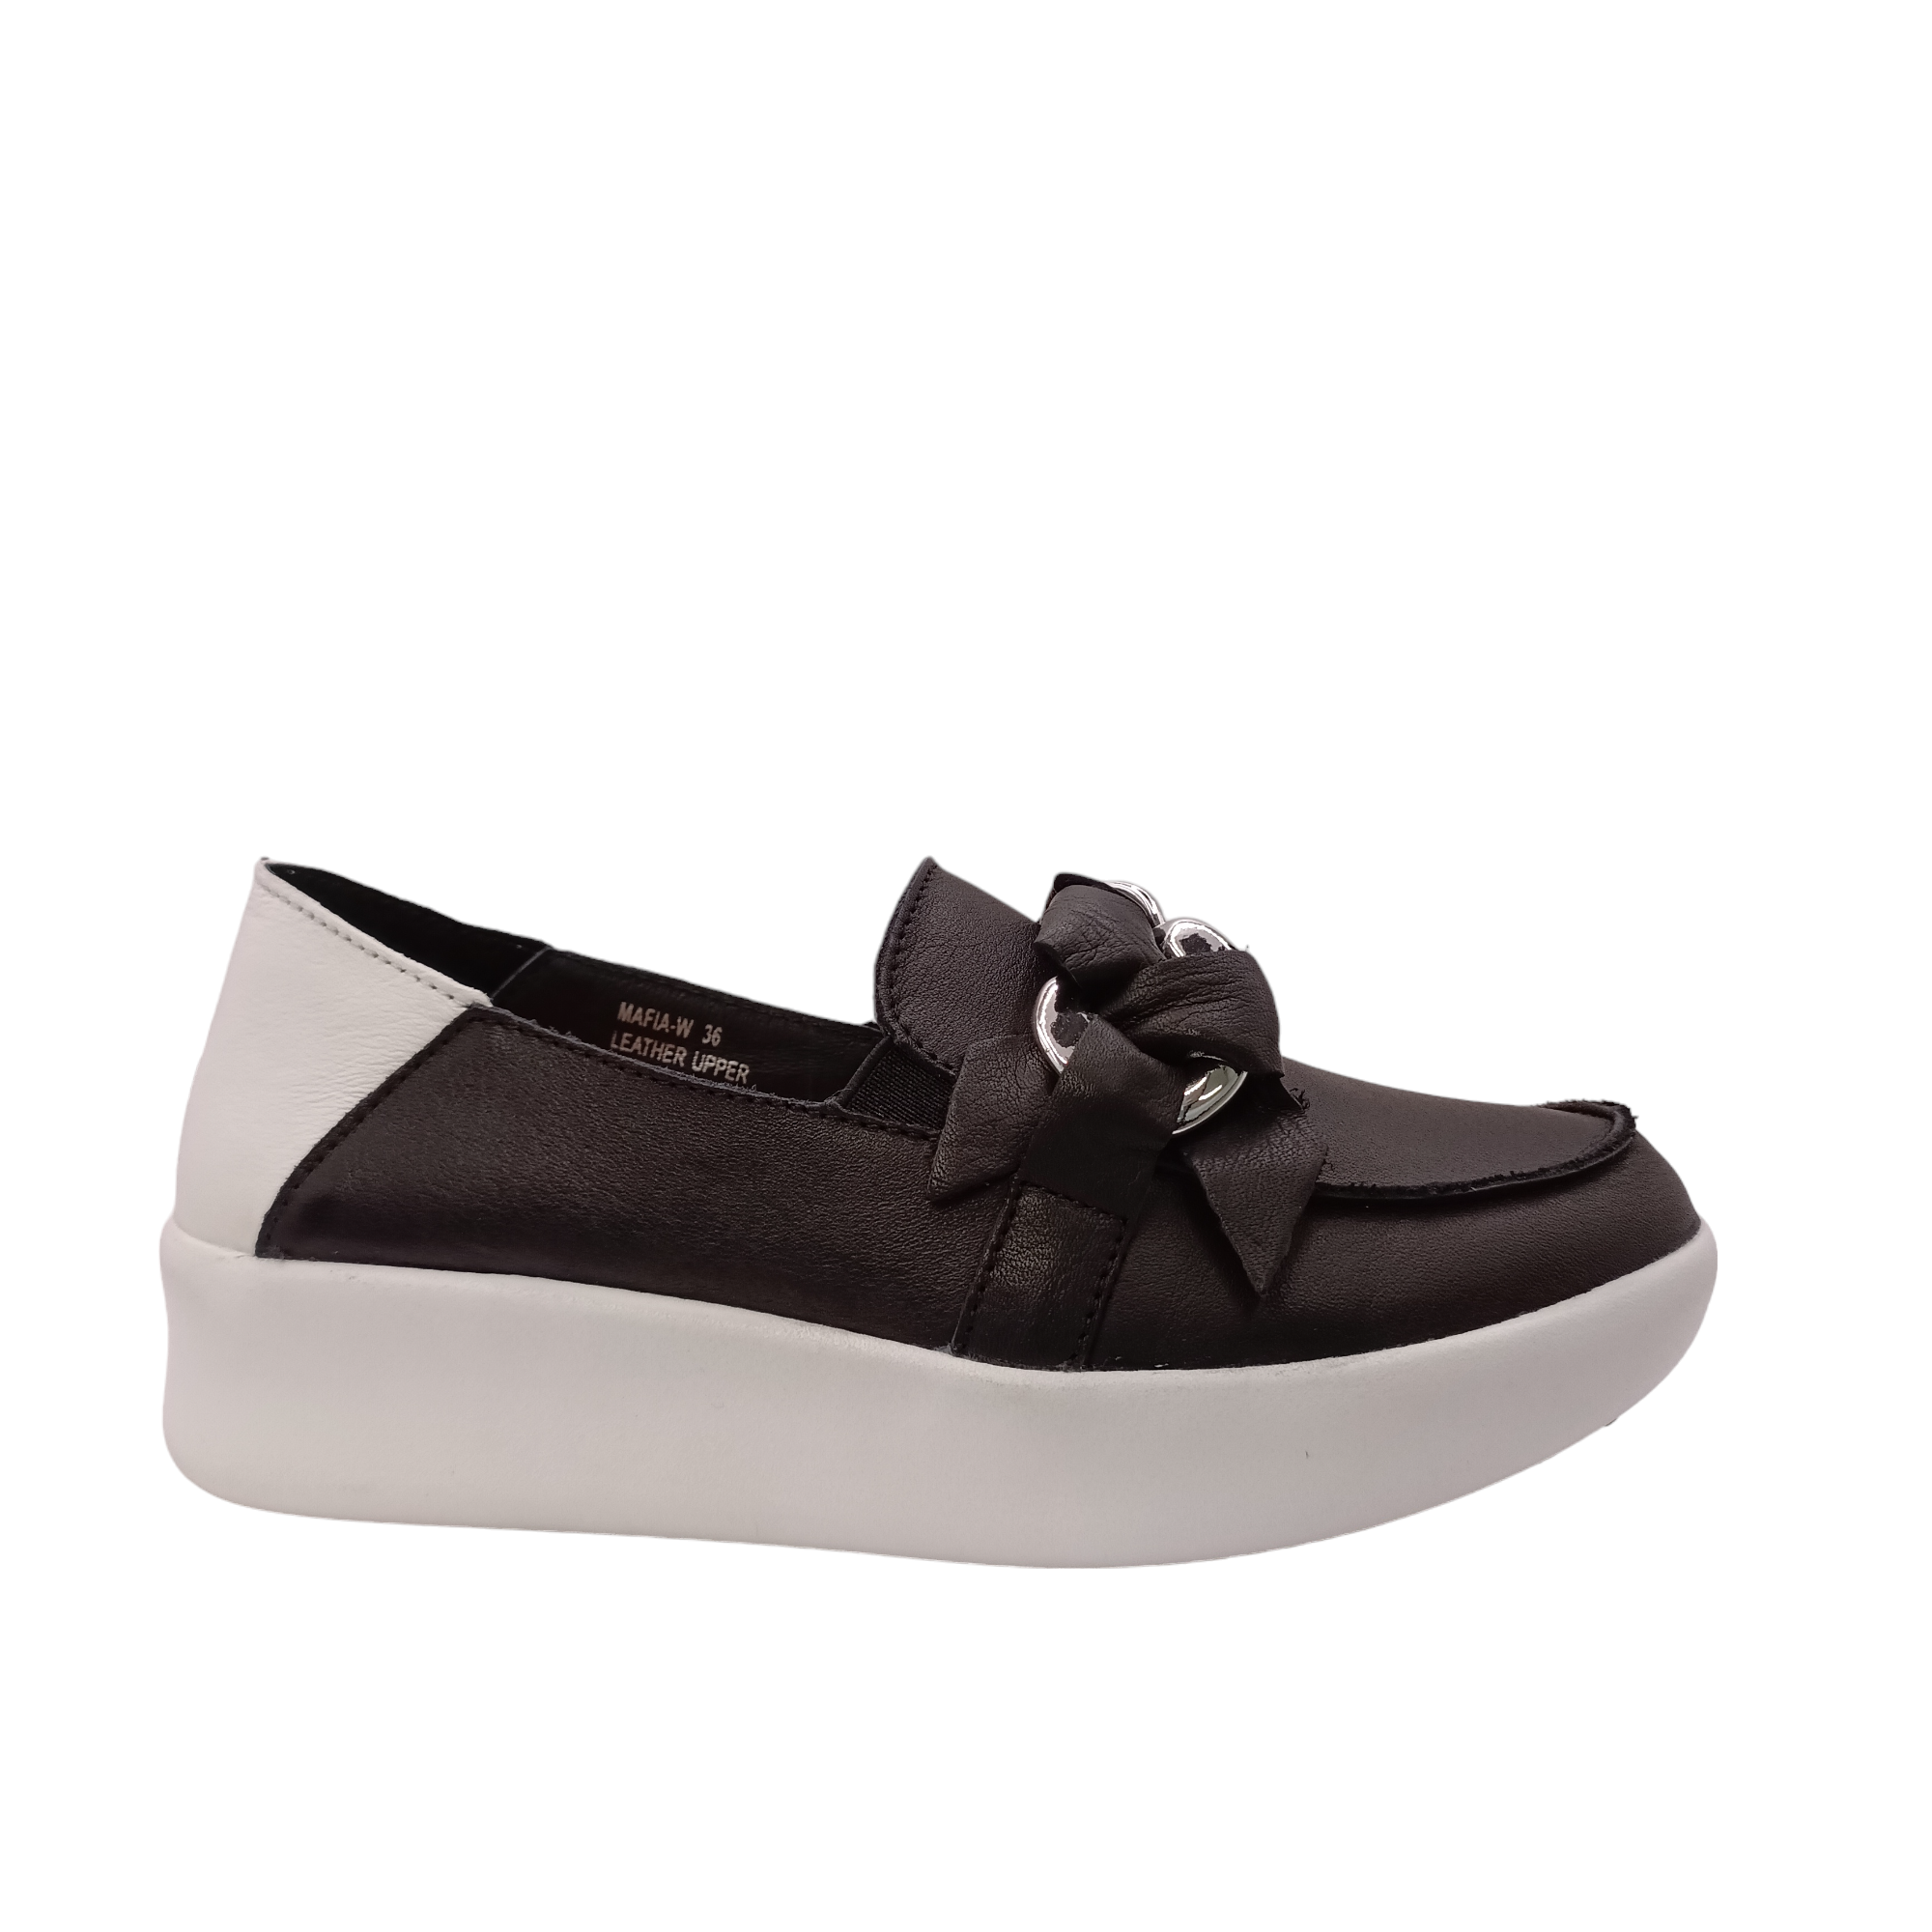 Side angled view of black slip on shoe called mafia from Alfie &amp; Evie. Black leather laced in silver chain decorating the top, white leather heel with a white sole. Shop Alfie &amp; Evie Womens Shoes online and In-Store with shoe&amp;me Mount Maunganui.